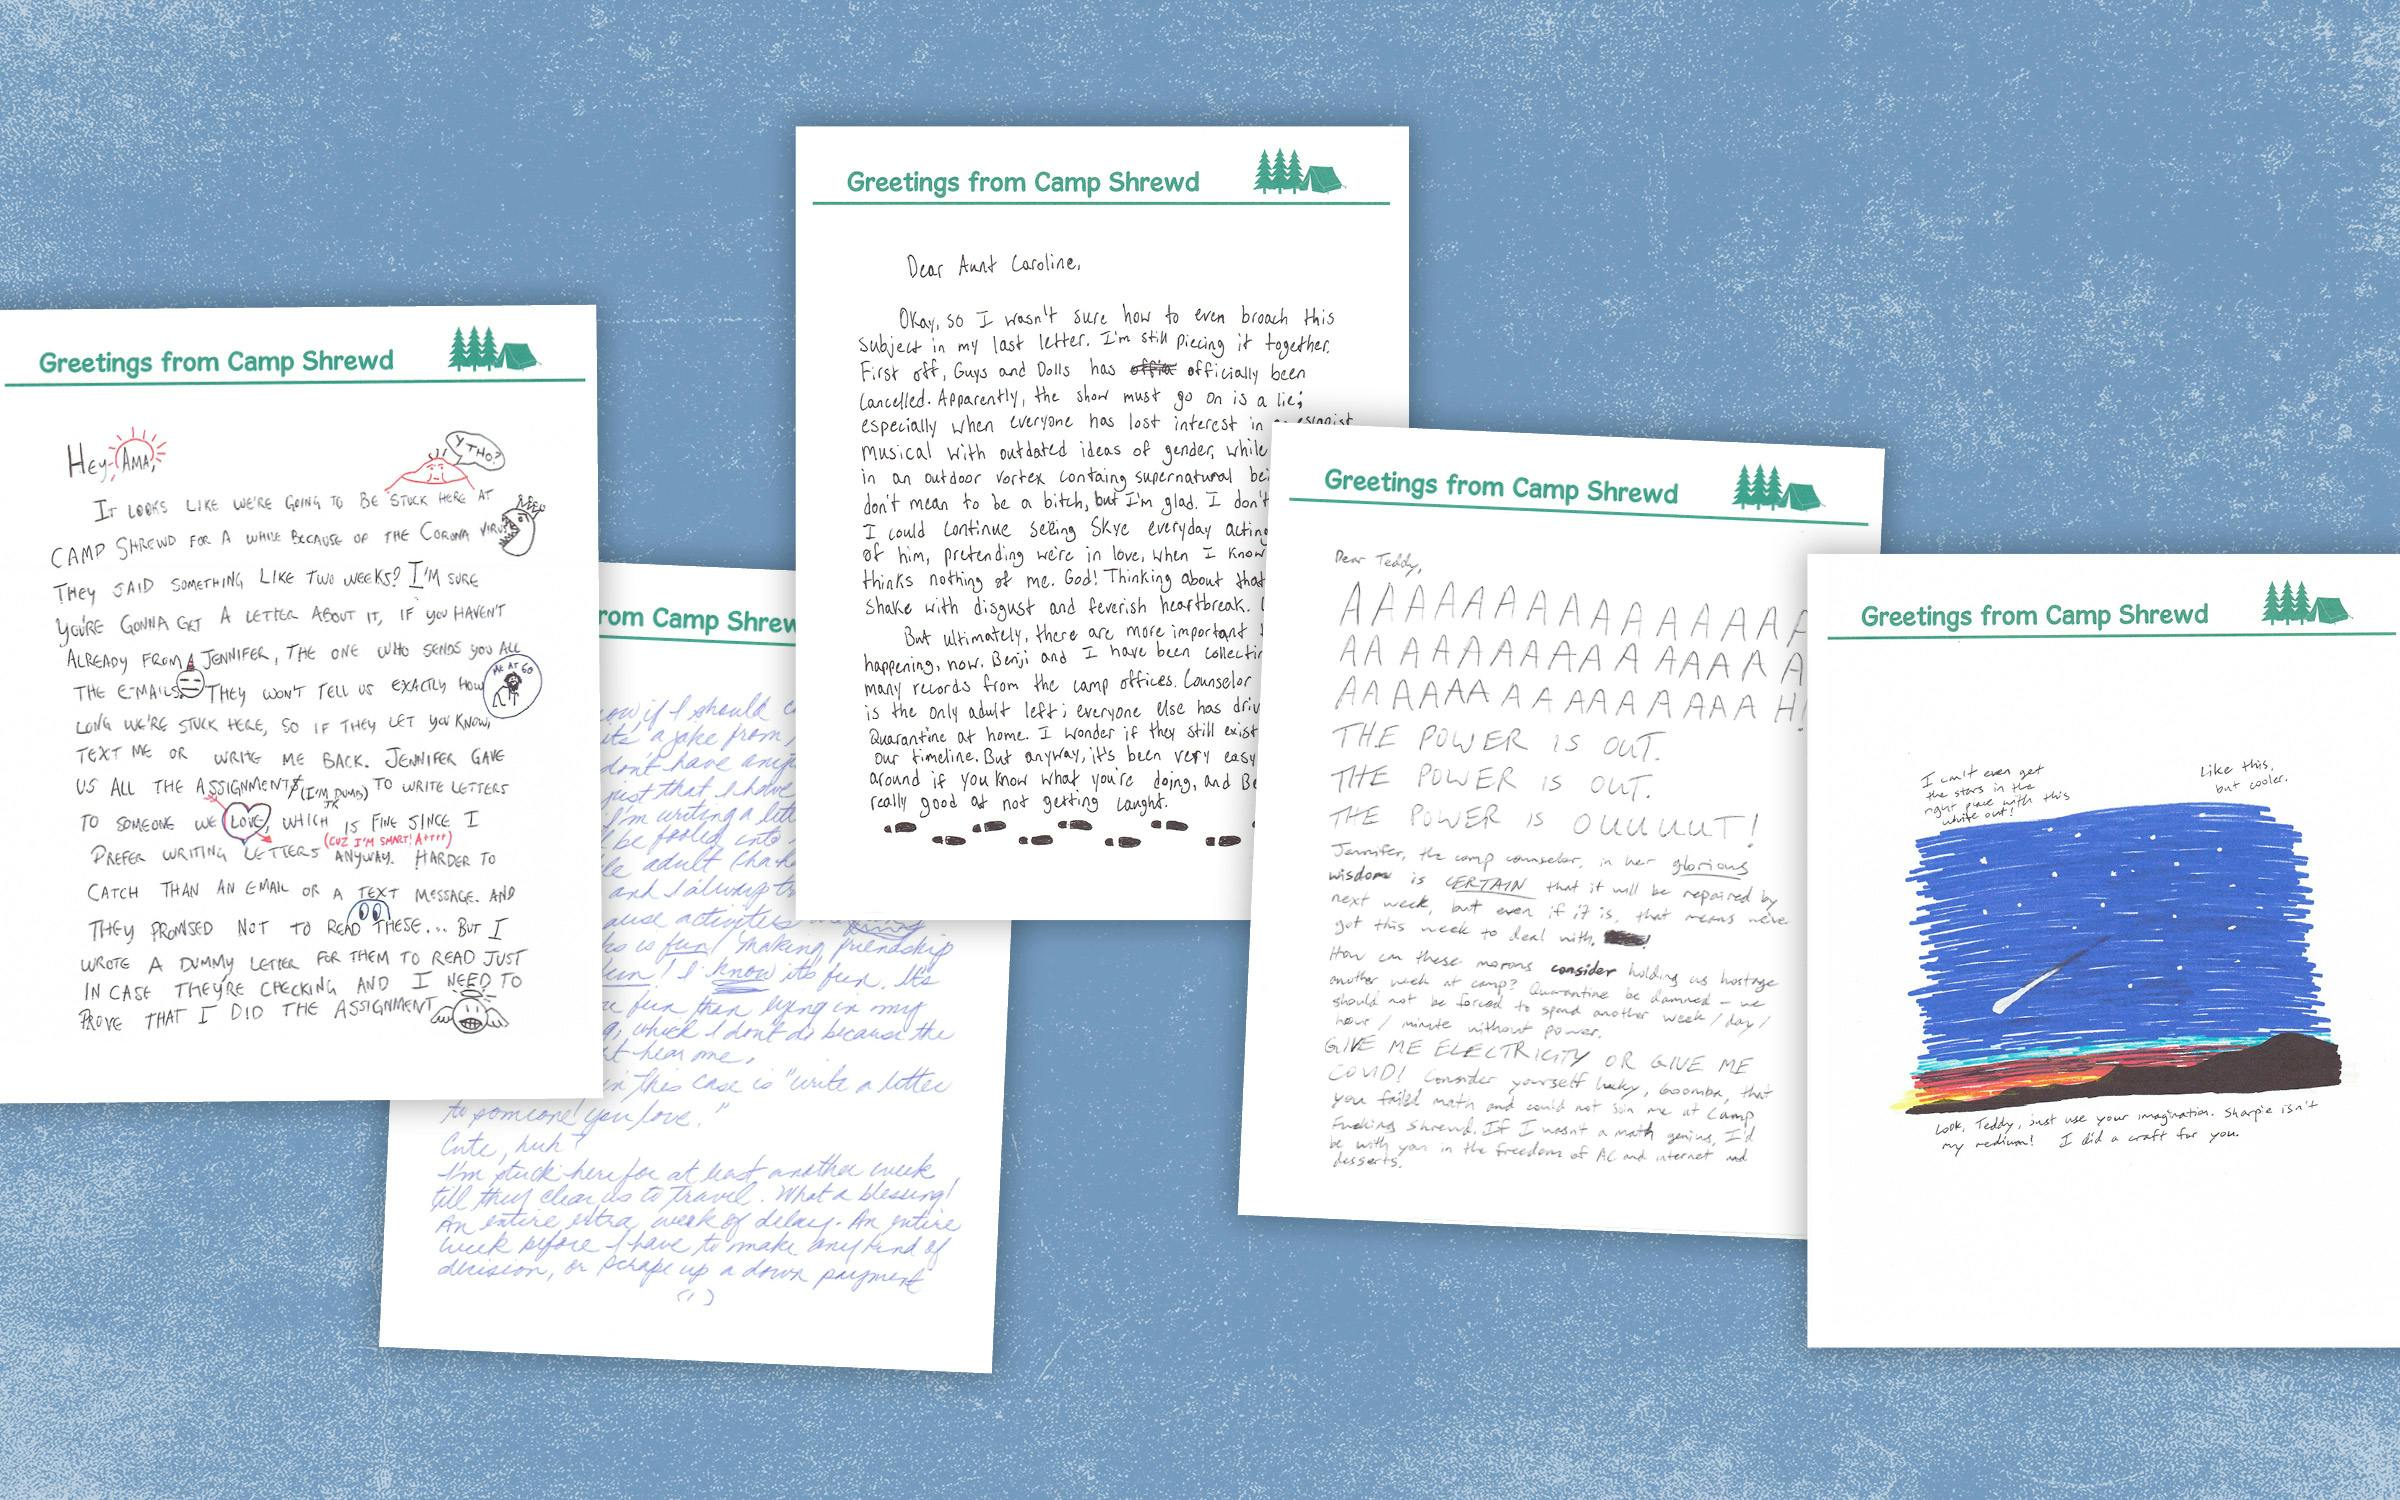 Camp Shrewd is an interactive play-by-mail experience based on a children's summer camp setting that sends "audience members" handwritten letters from their assigned characters each week.